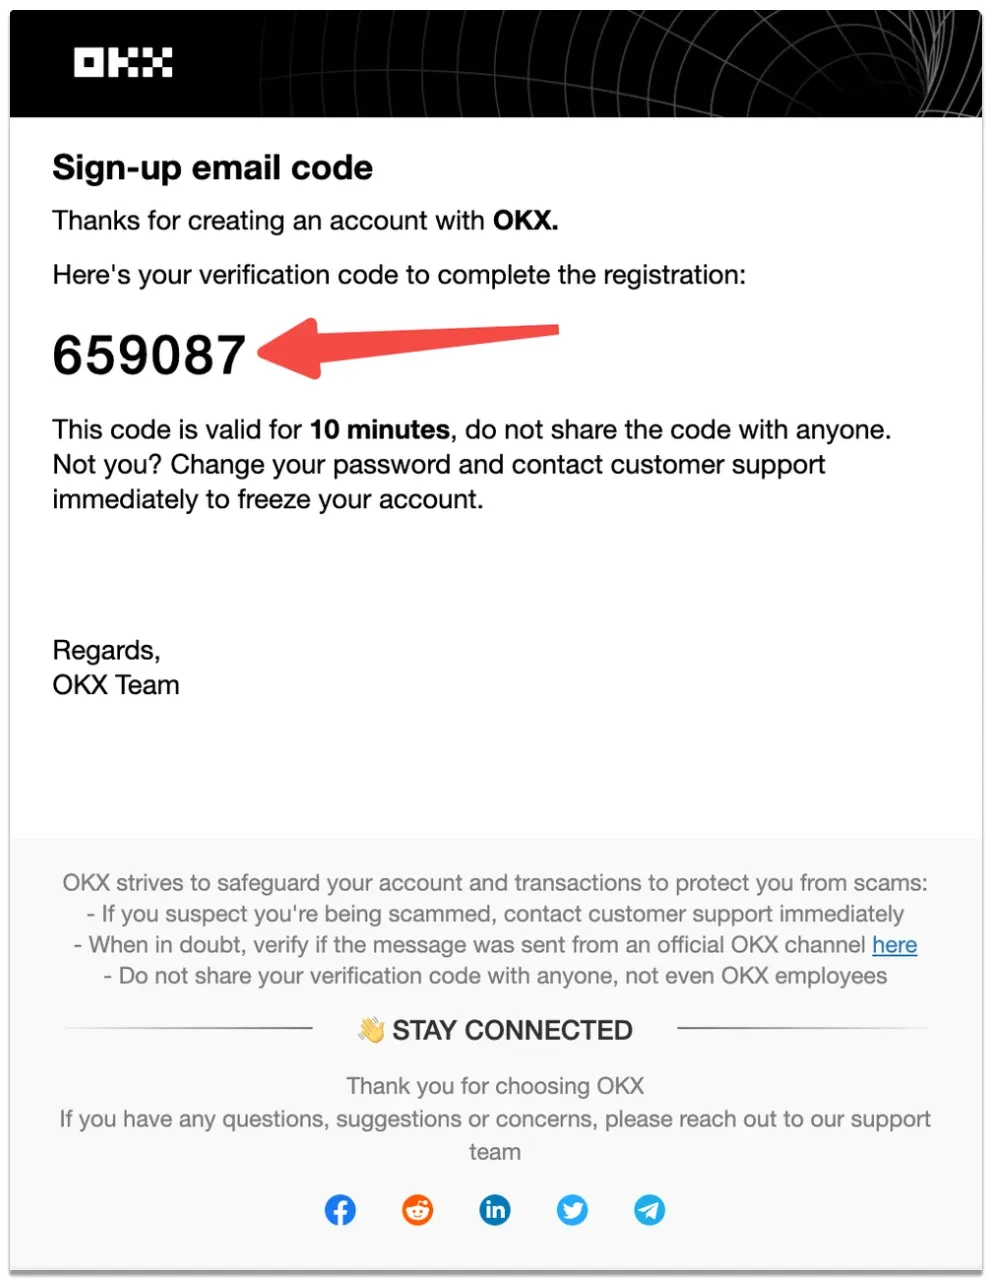 Check your email for the registration verification code